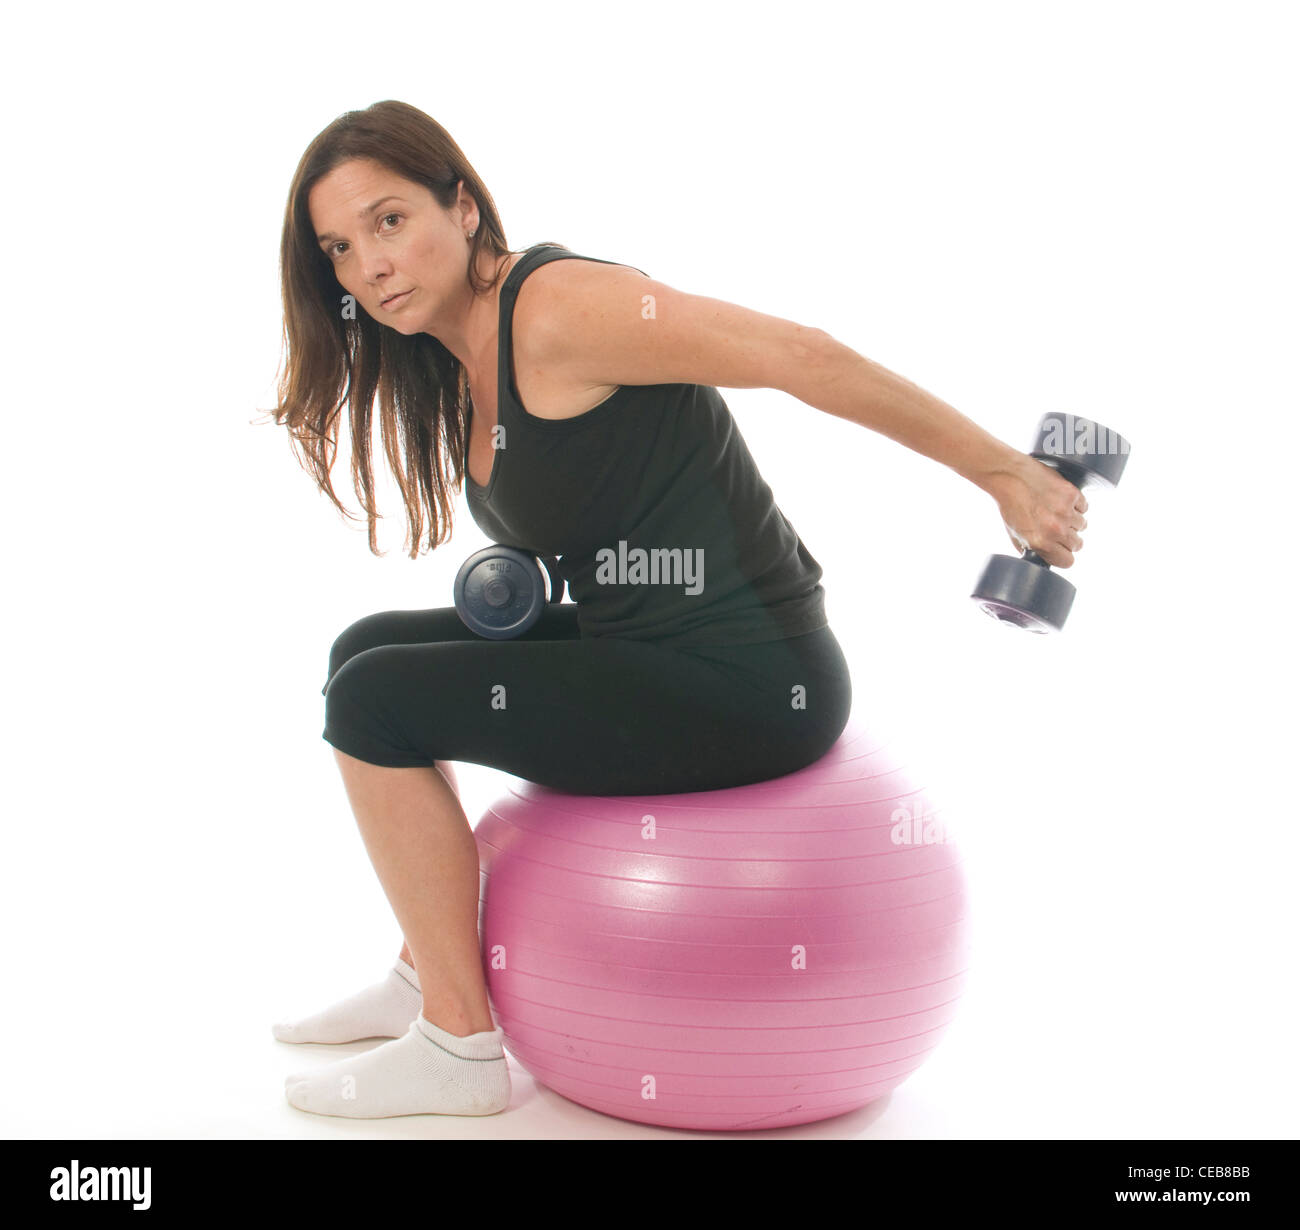 middle age woman fitness exercising strength training with dumbbell weights core training ball Stock Photo